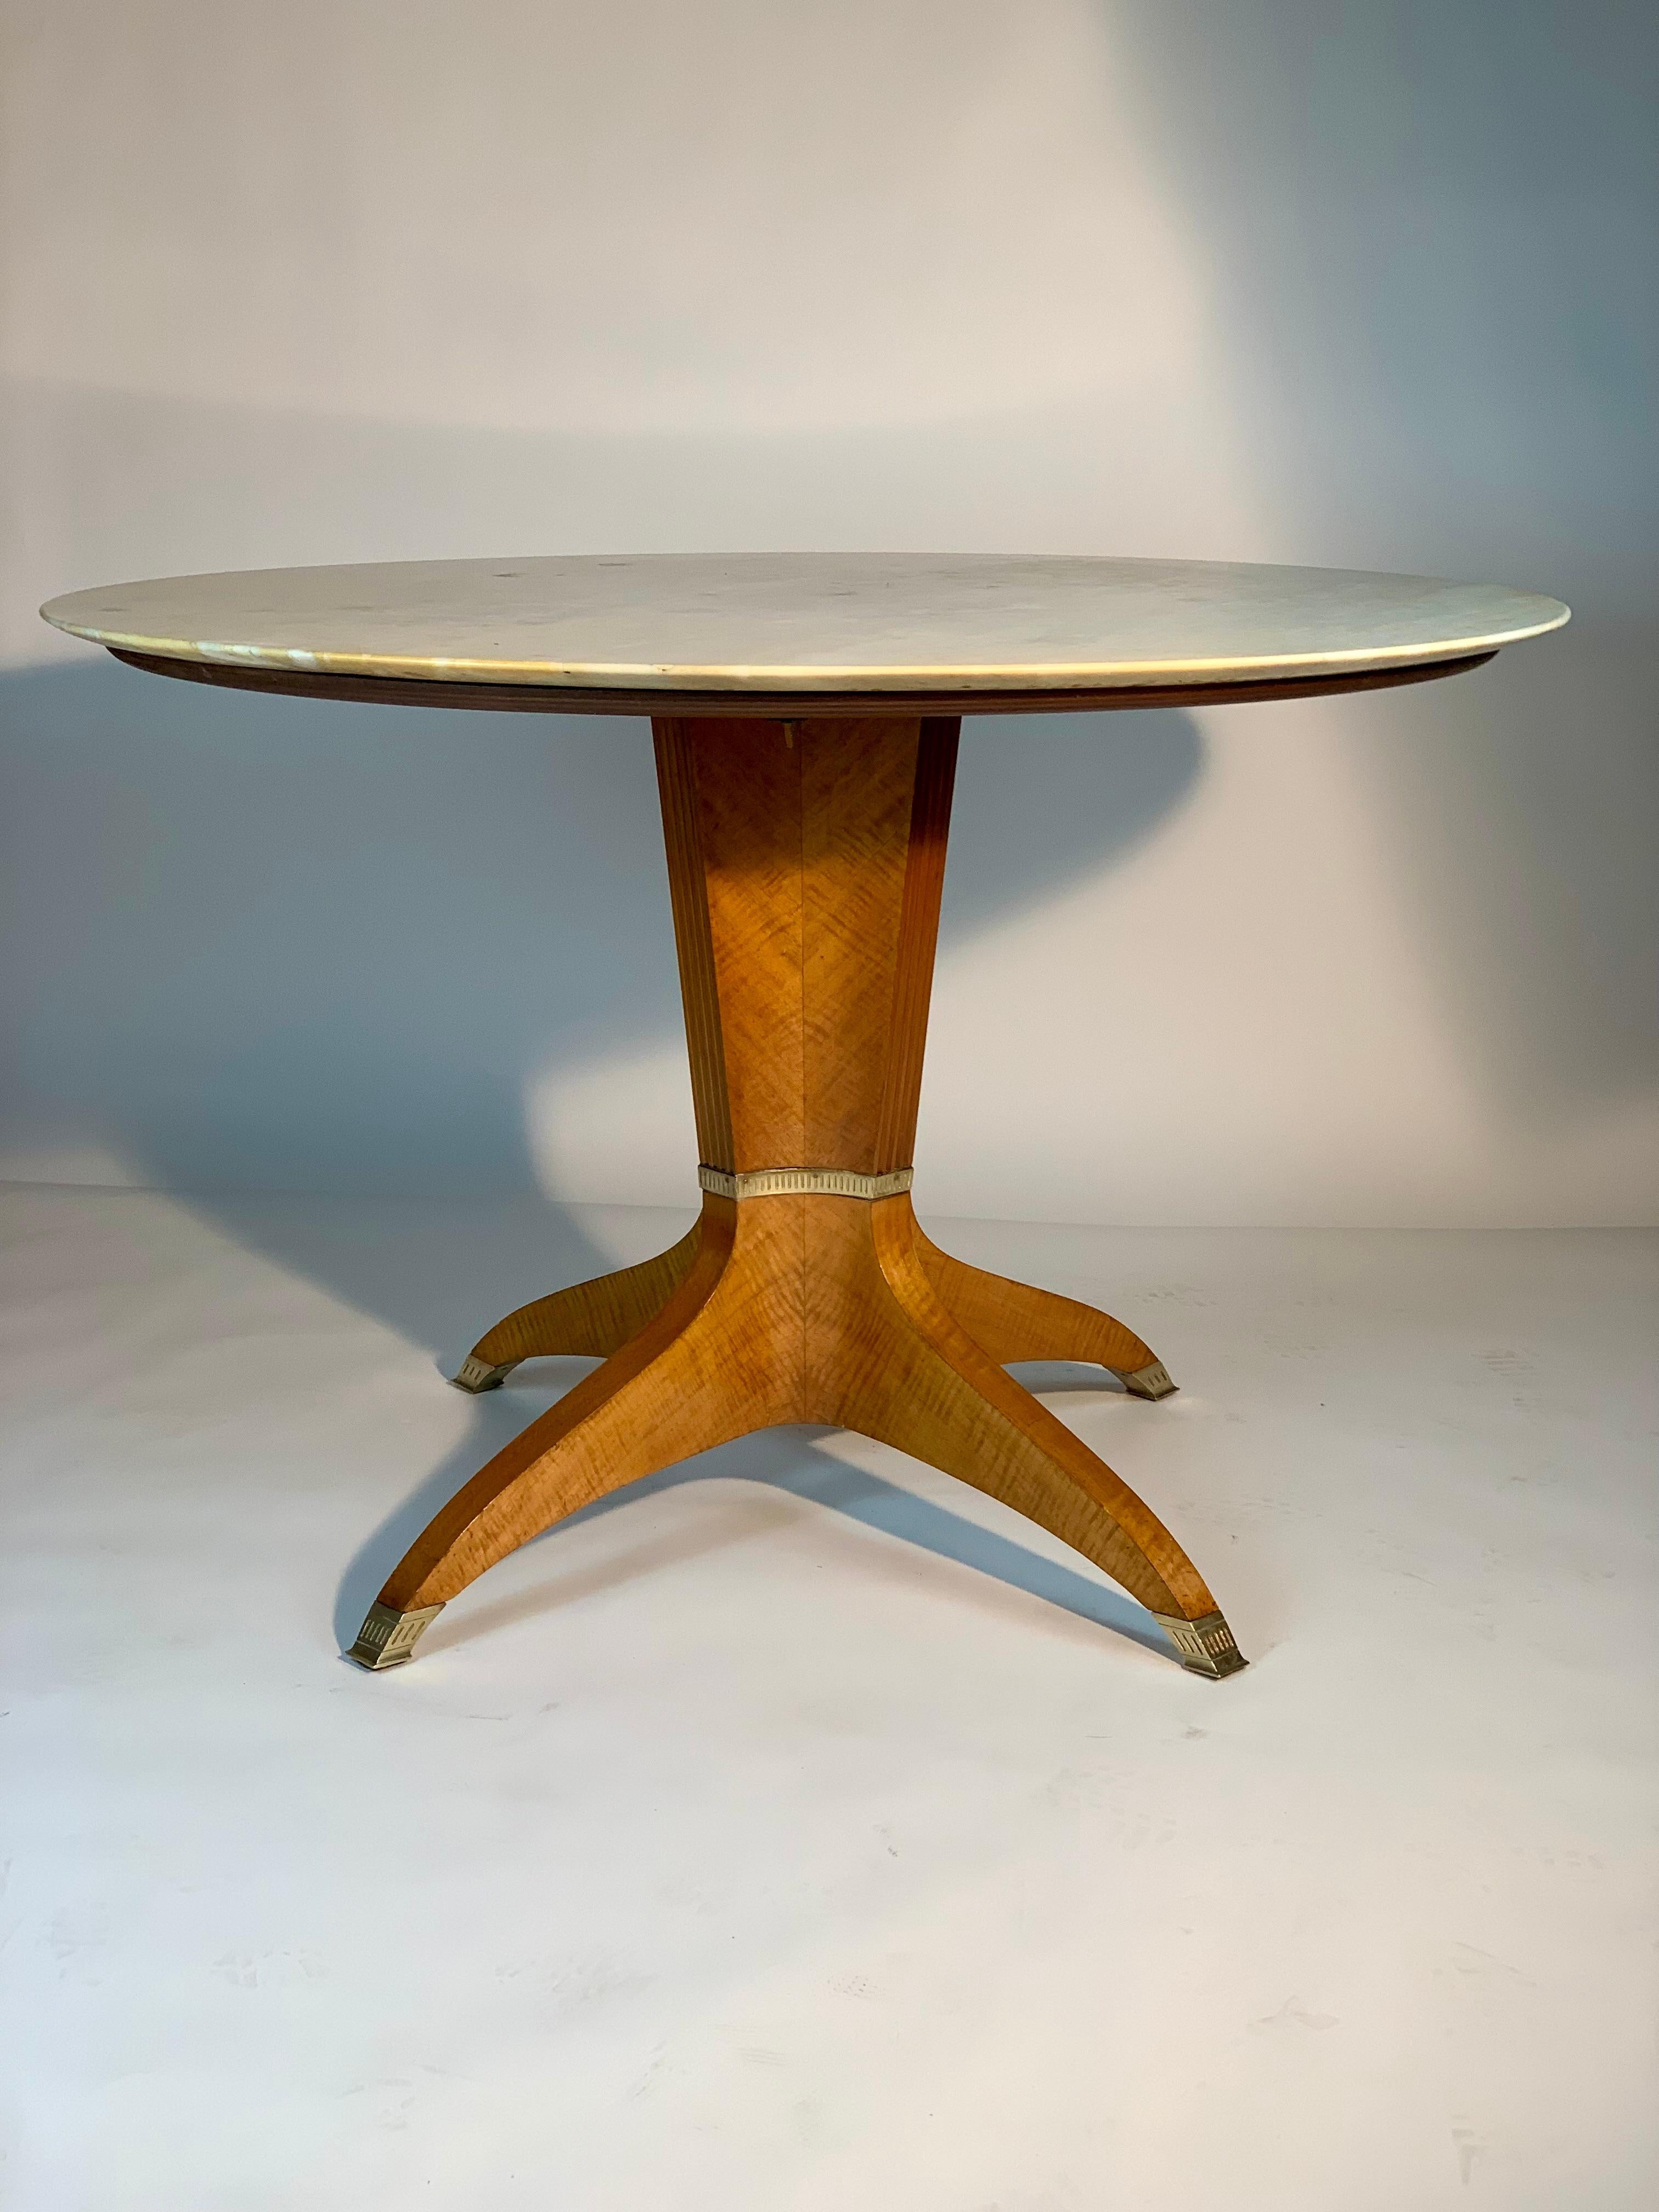 Mid-century Italian round table with light colored marble top and rounded edge, four-lobed base each element with grooved front side and details in cast brass that turn around and form a sort of band, from the base four legs extend curved towards